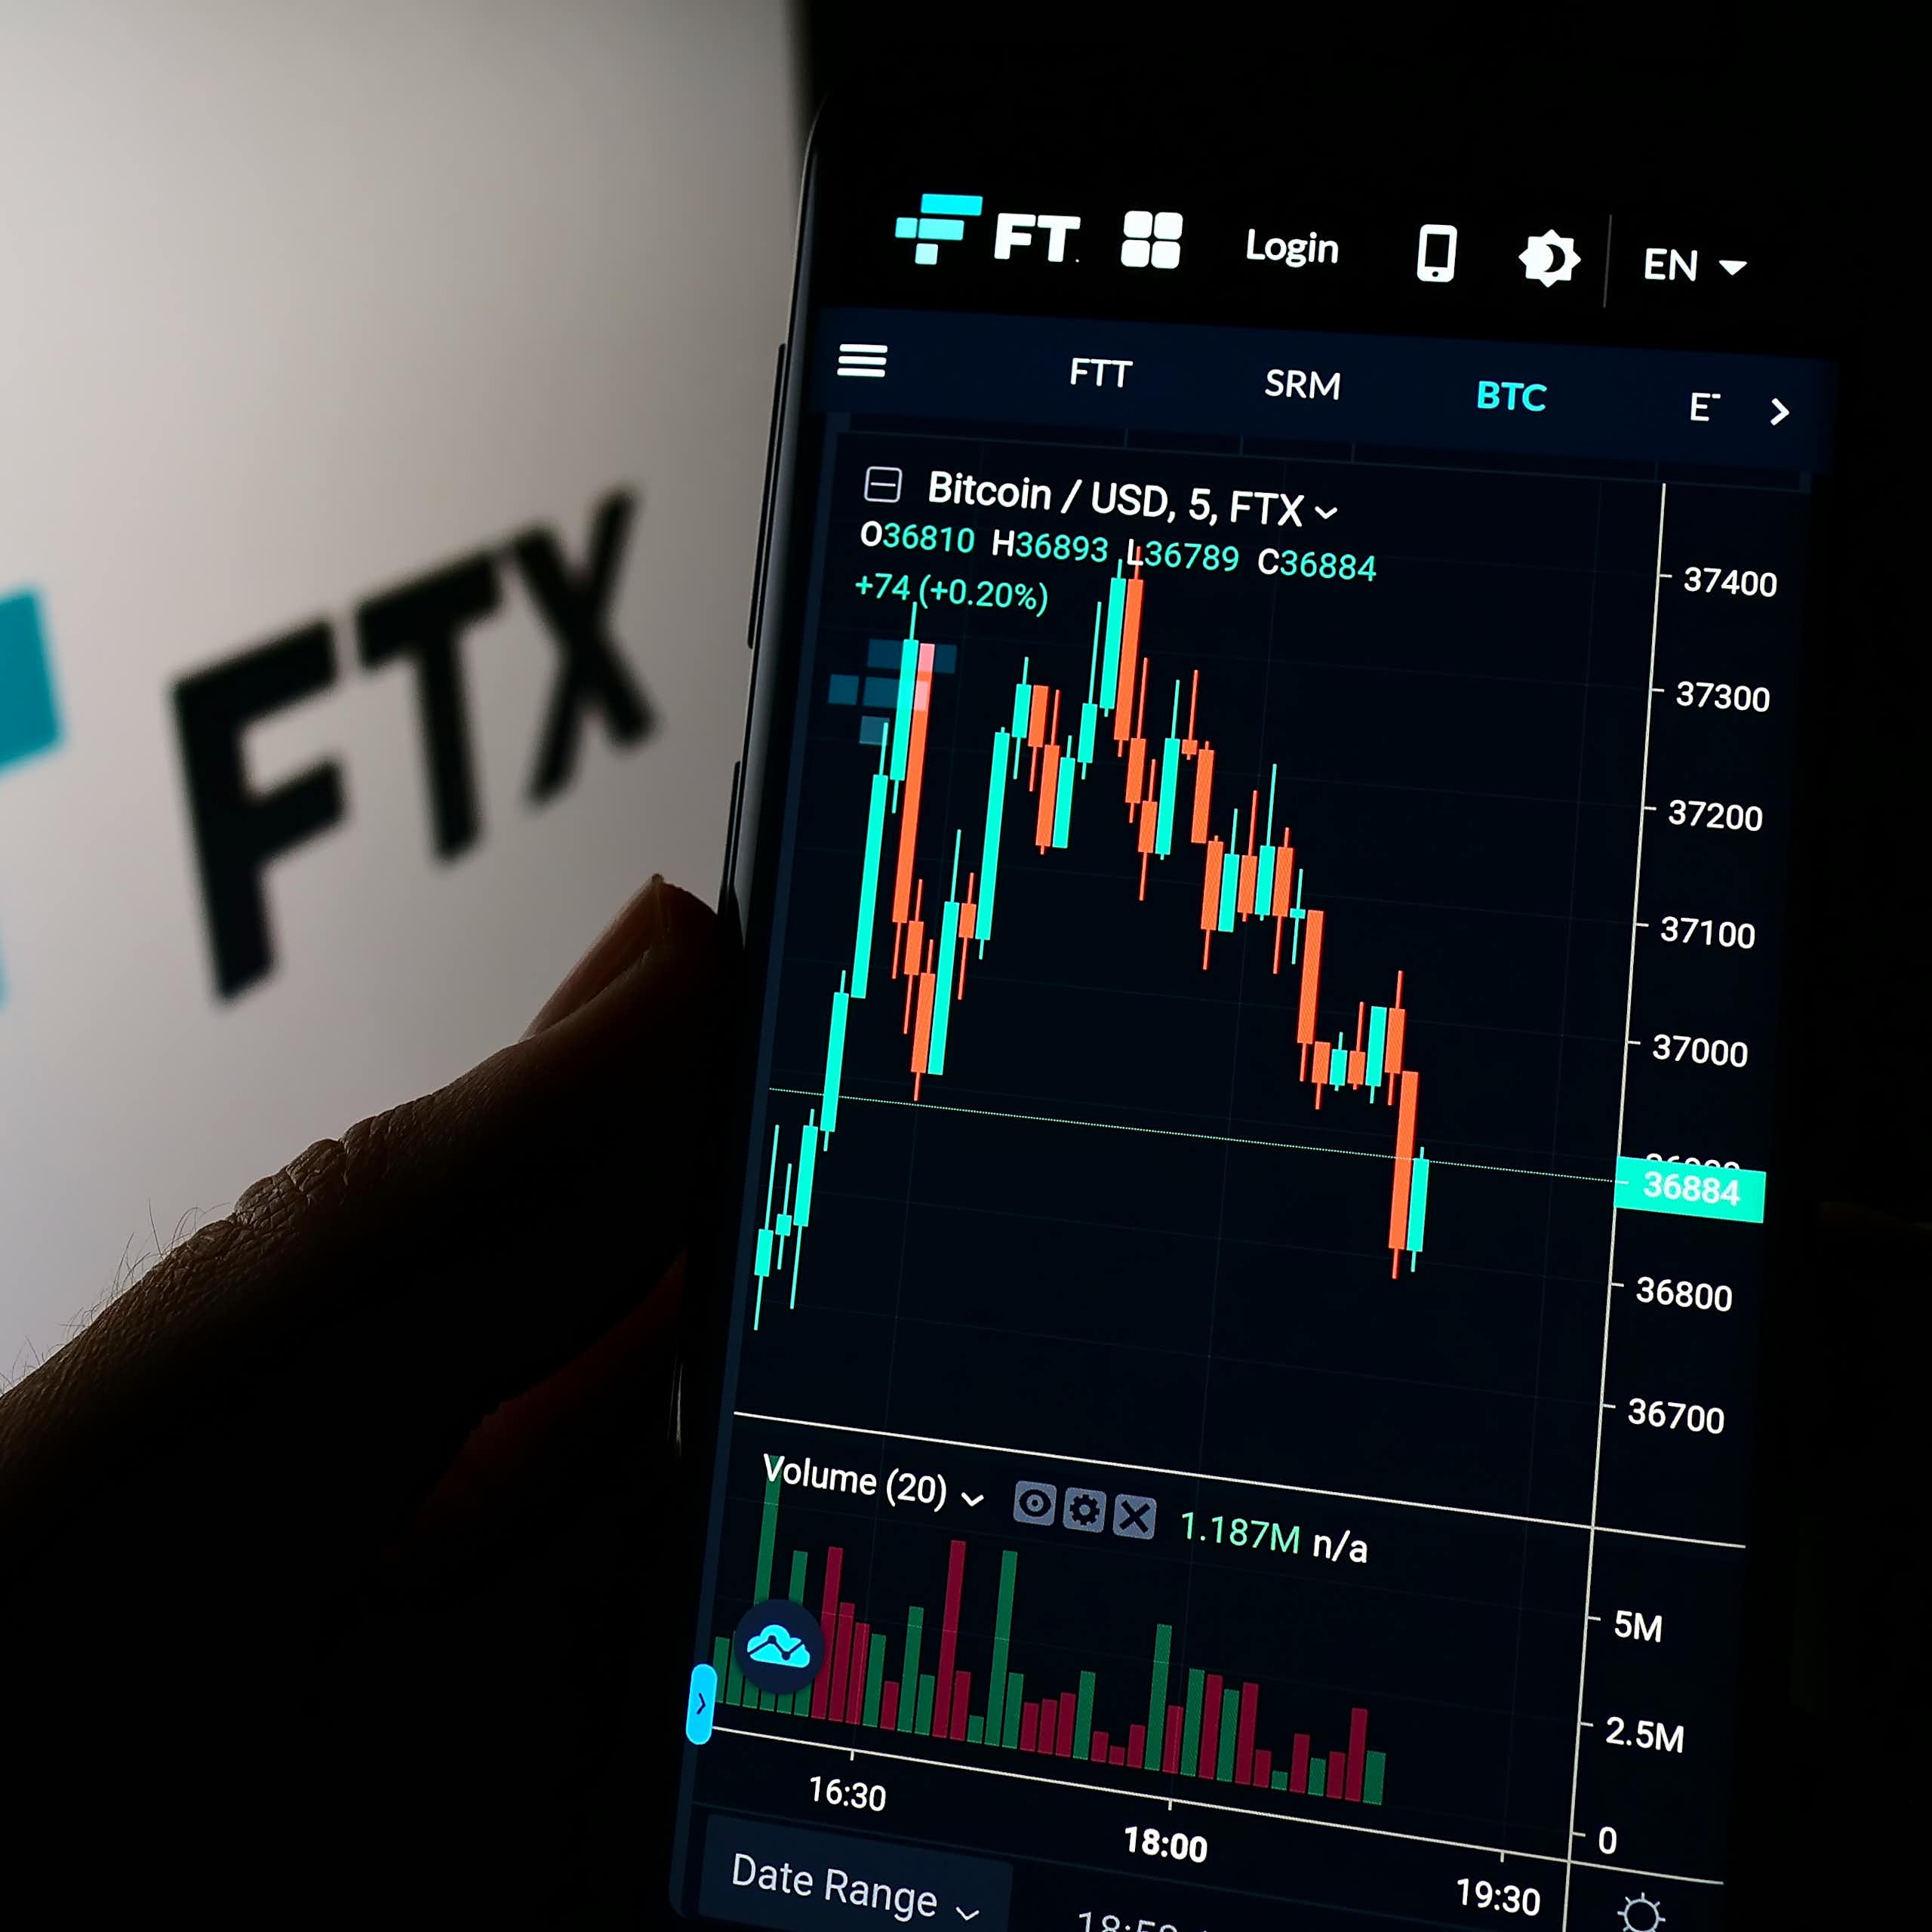 FTX logo and a phone screen showing FTX prices